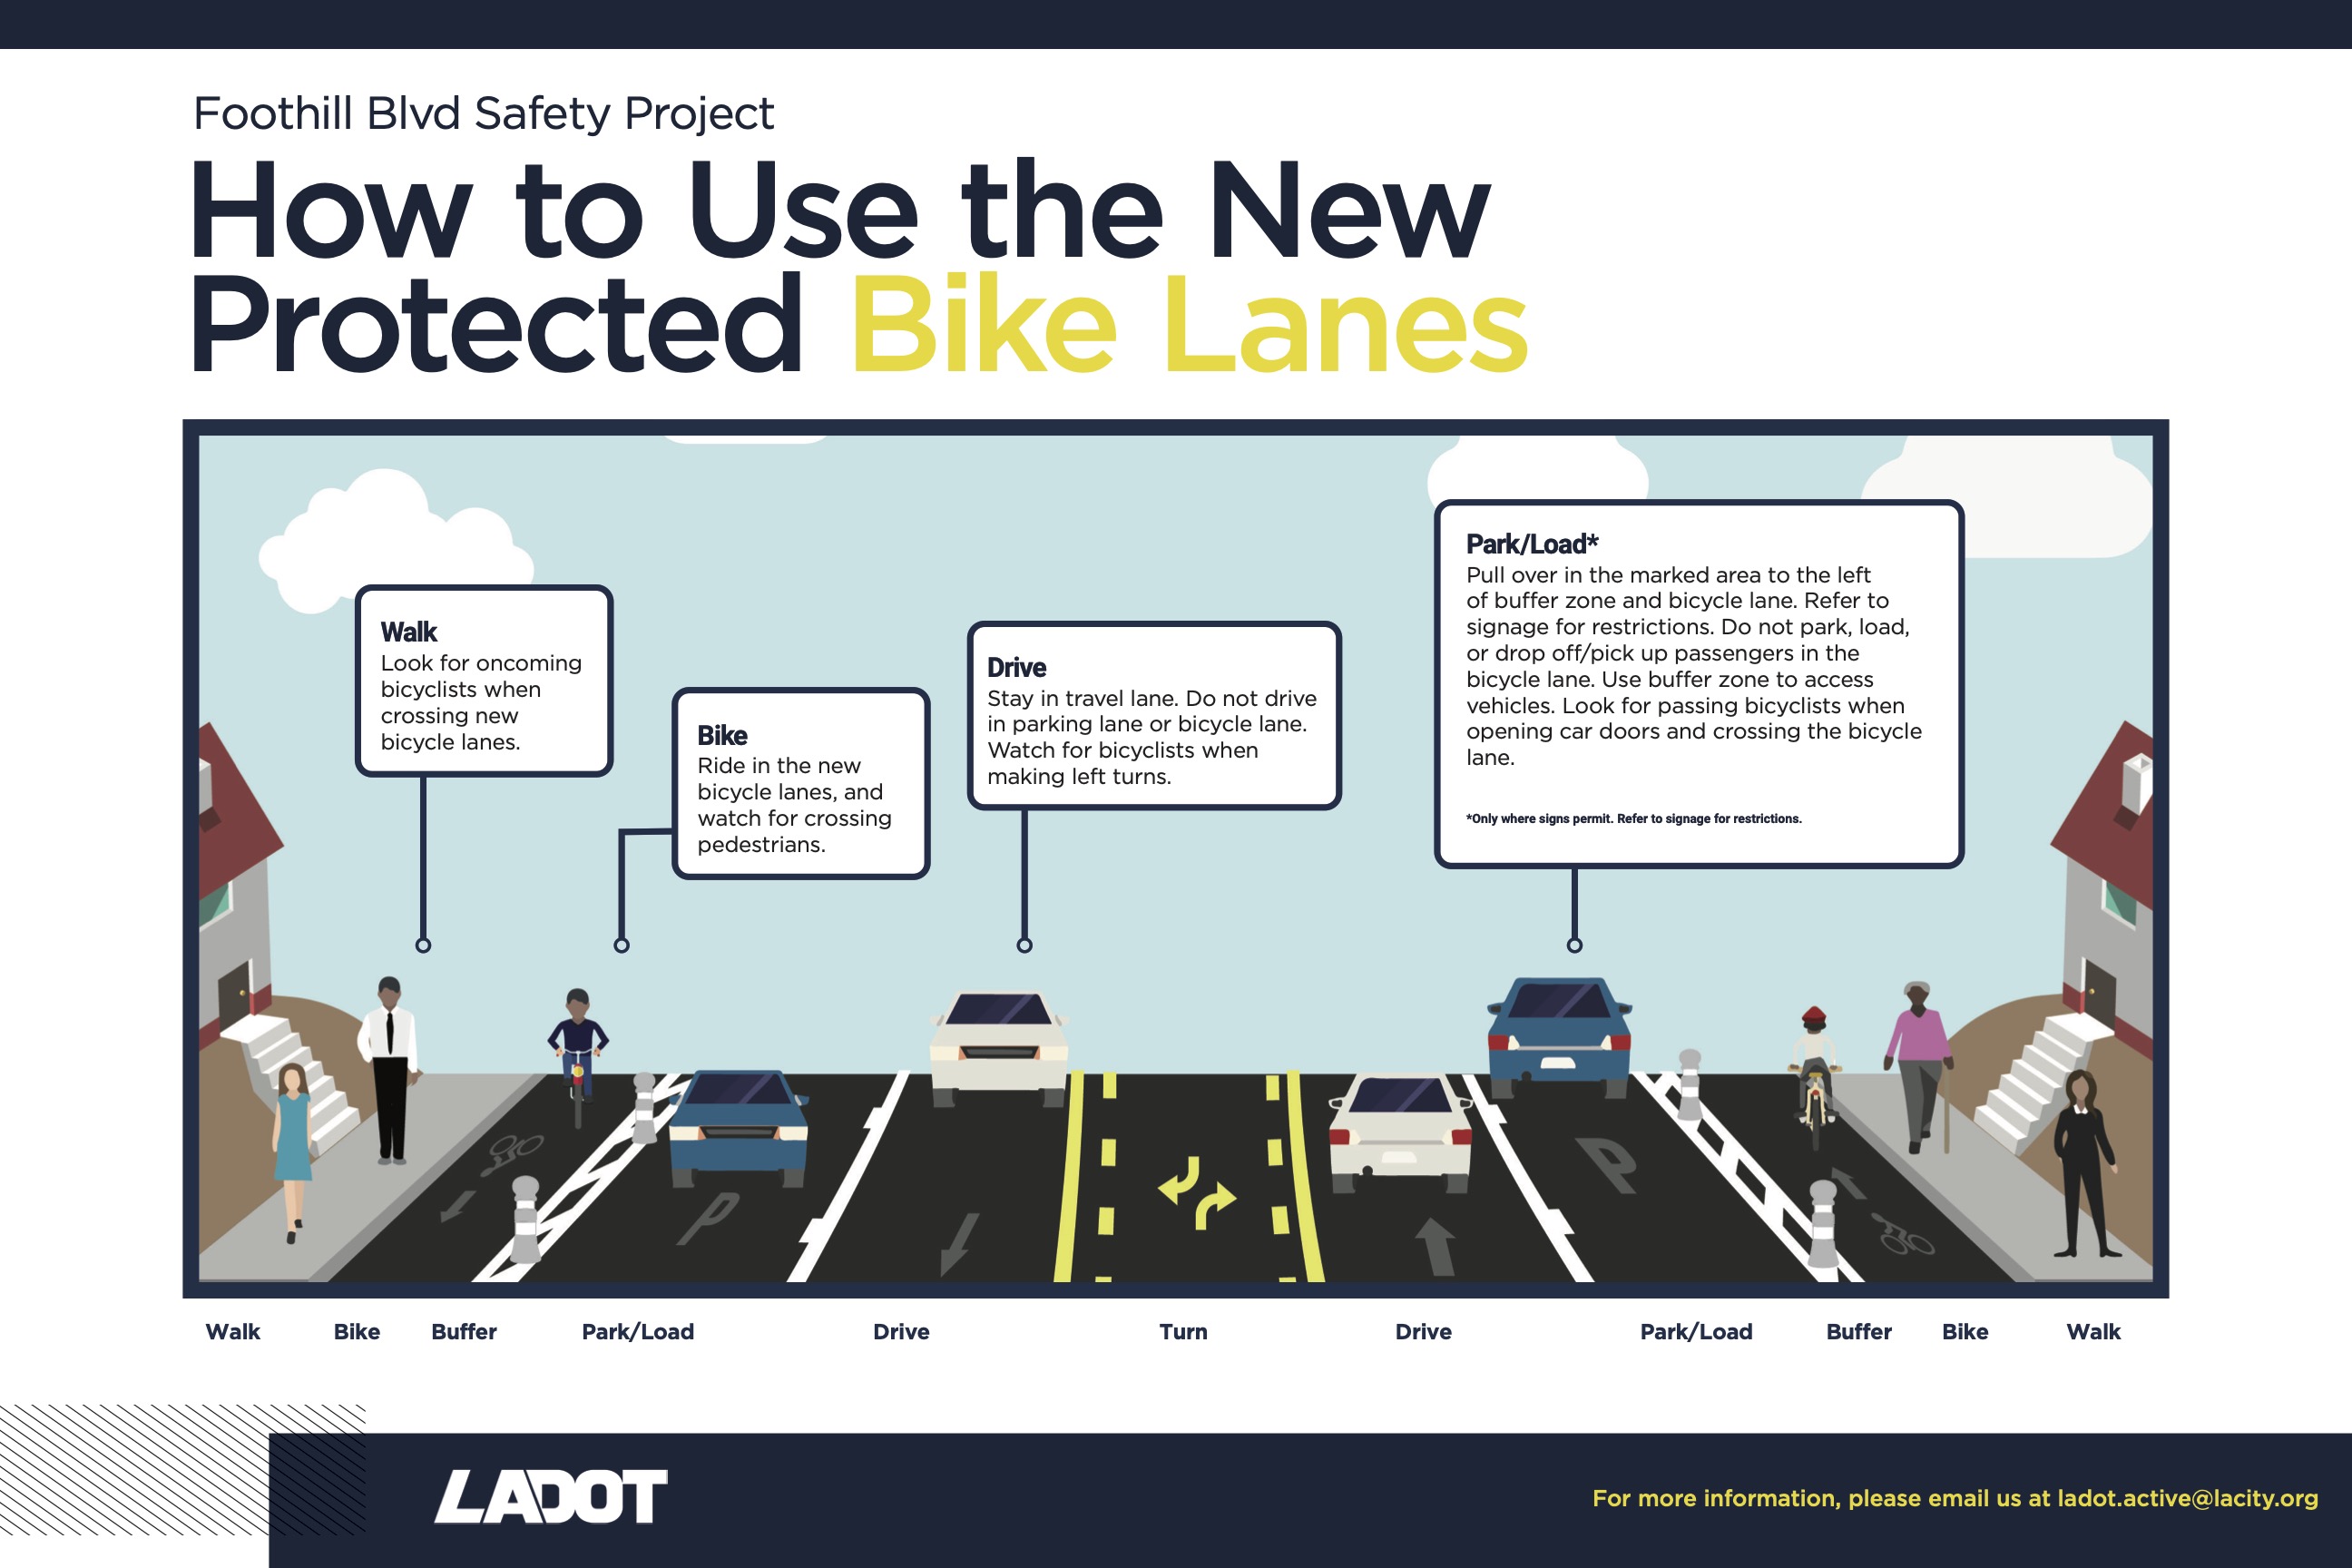 How to Use the New Protected Bike Lanes